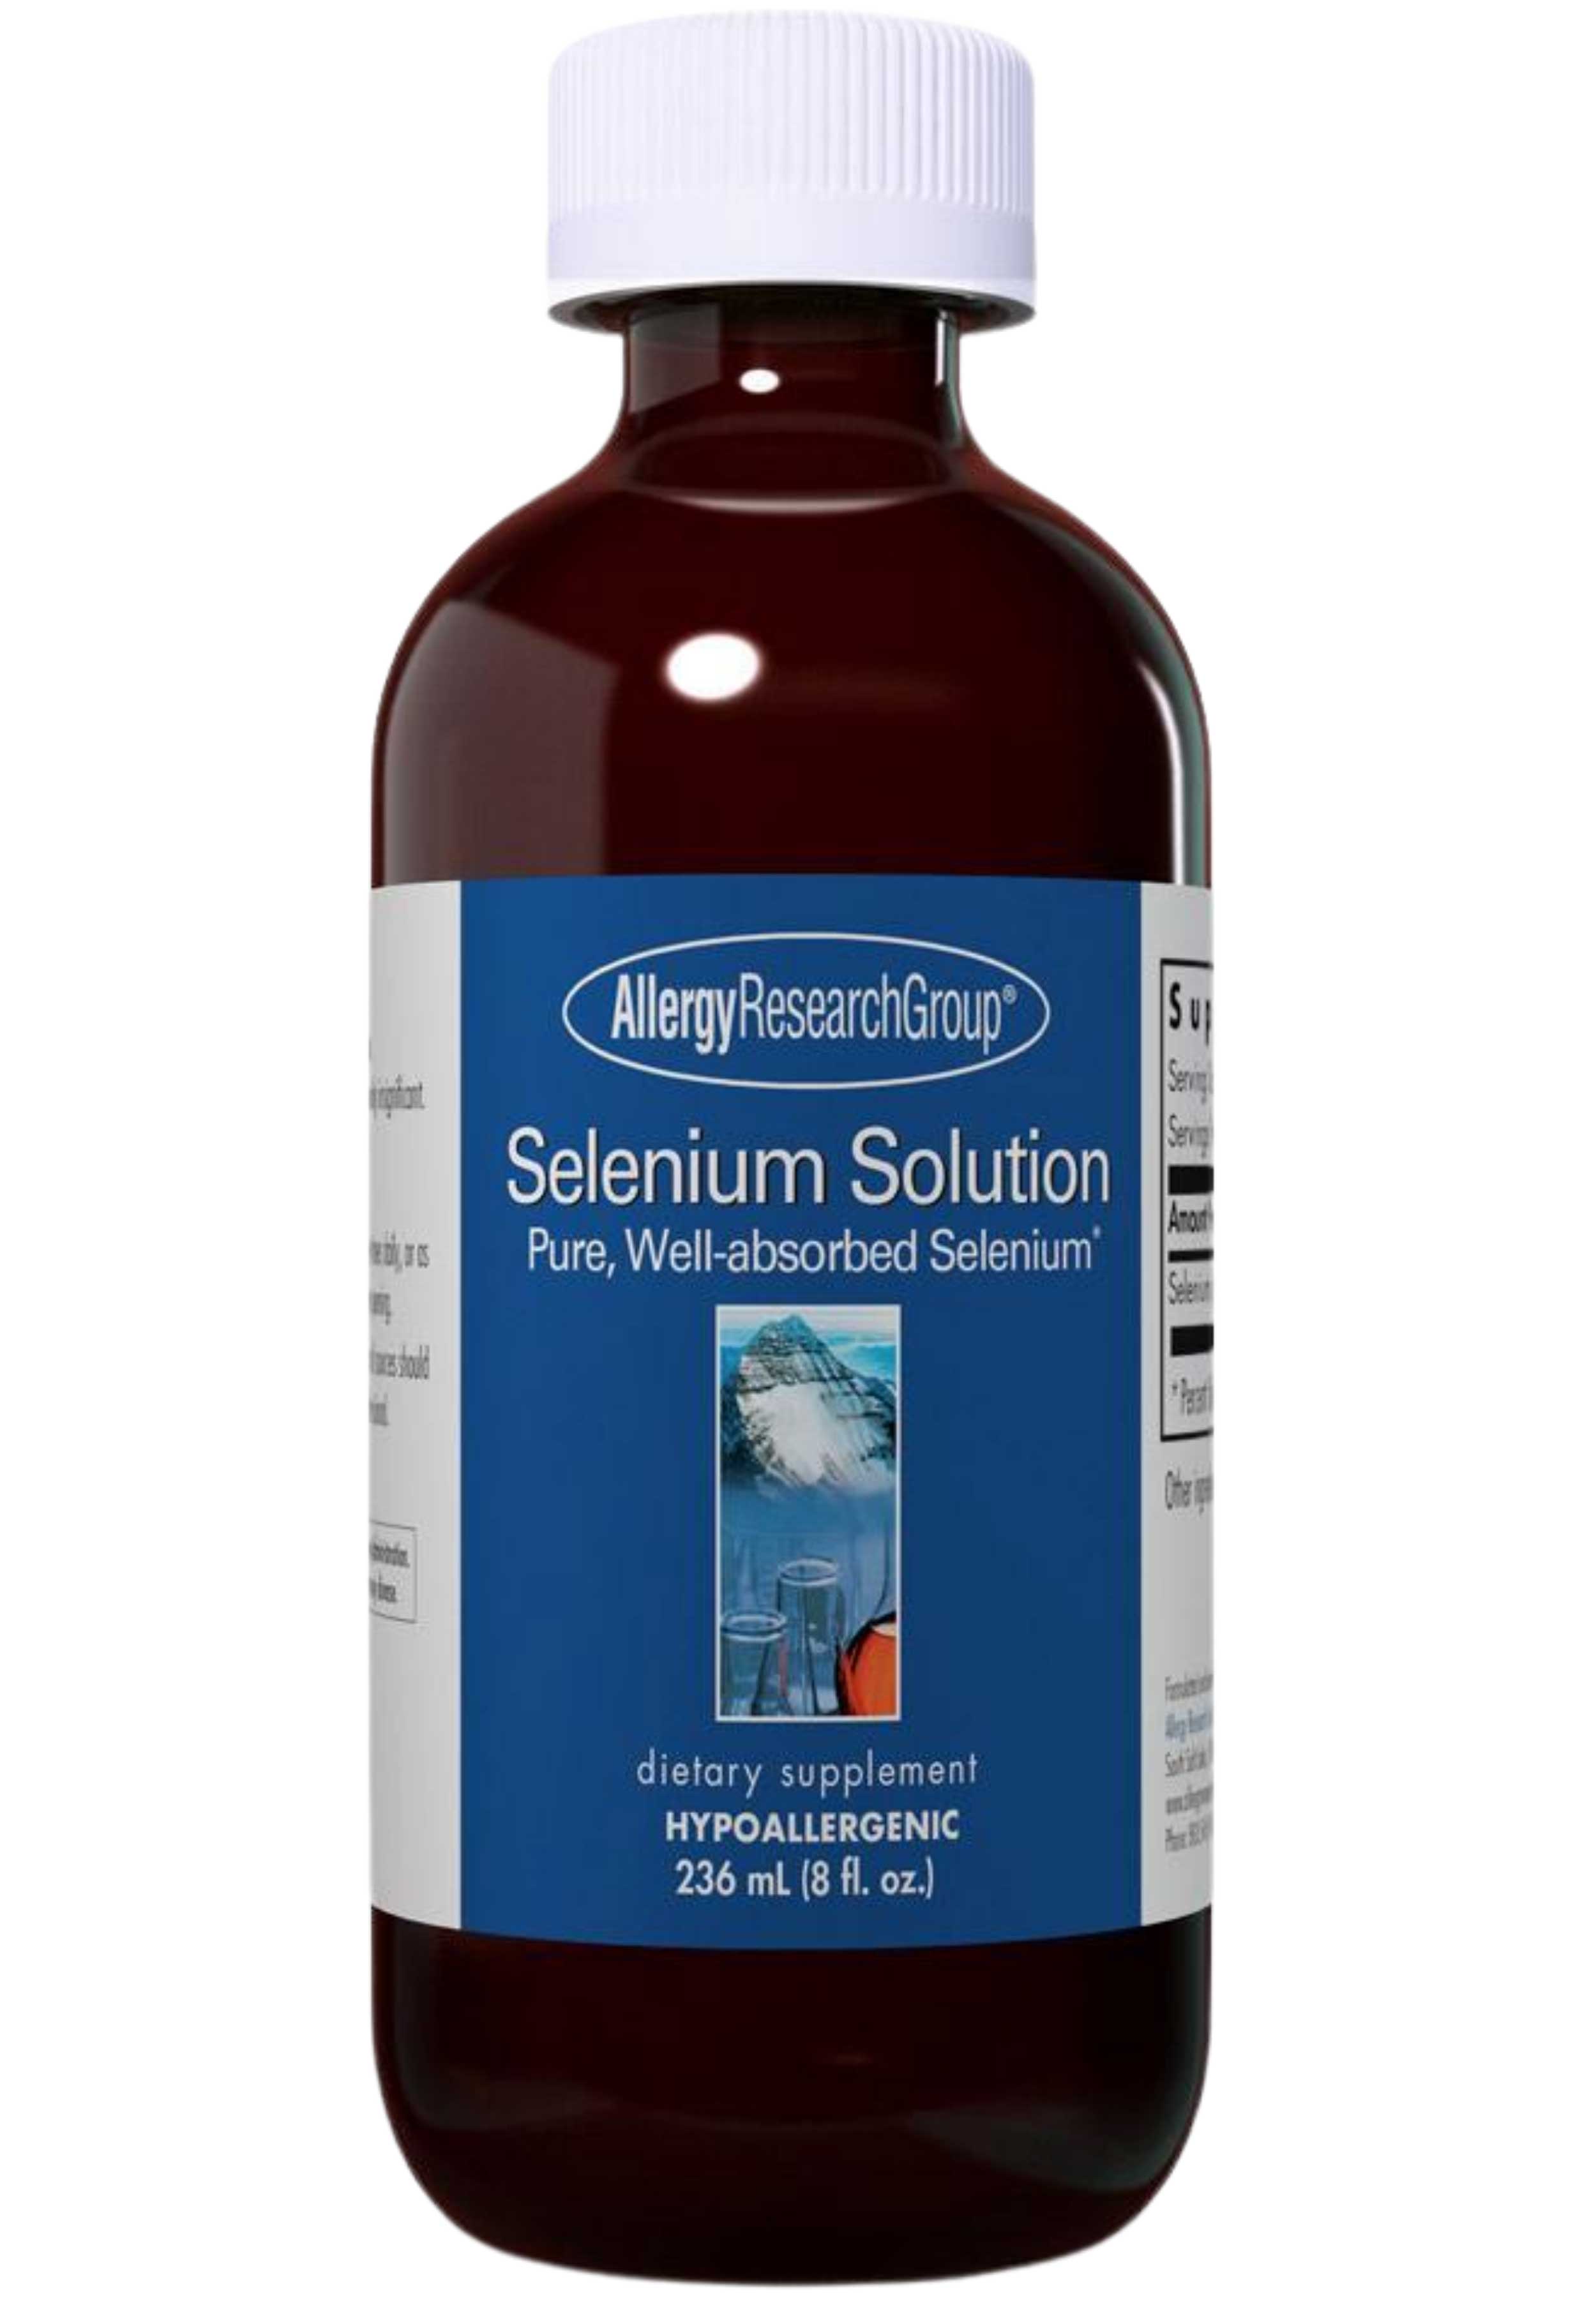 Allergy Research Group Selenium Solution